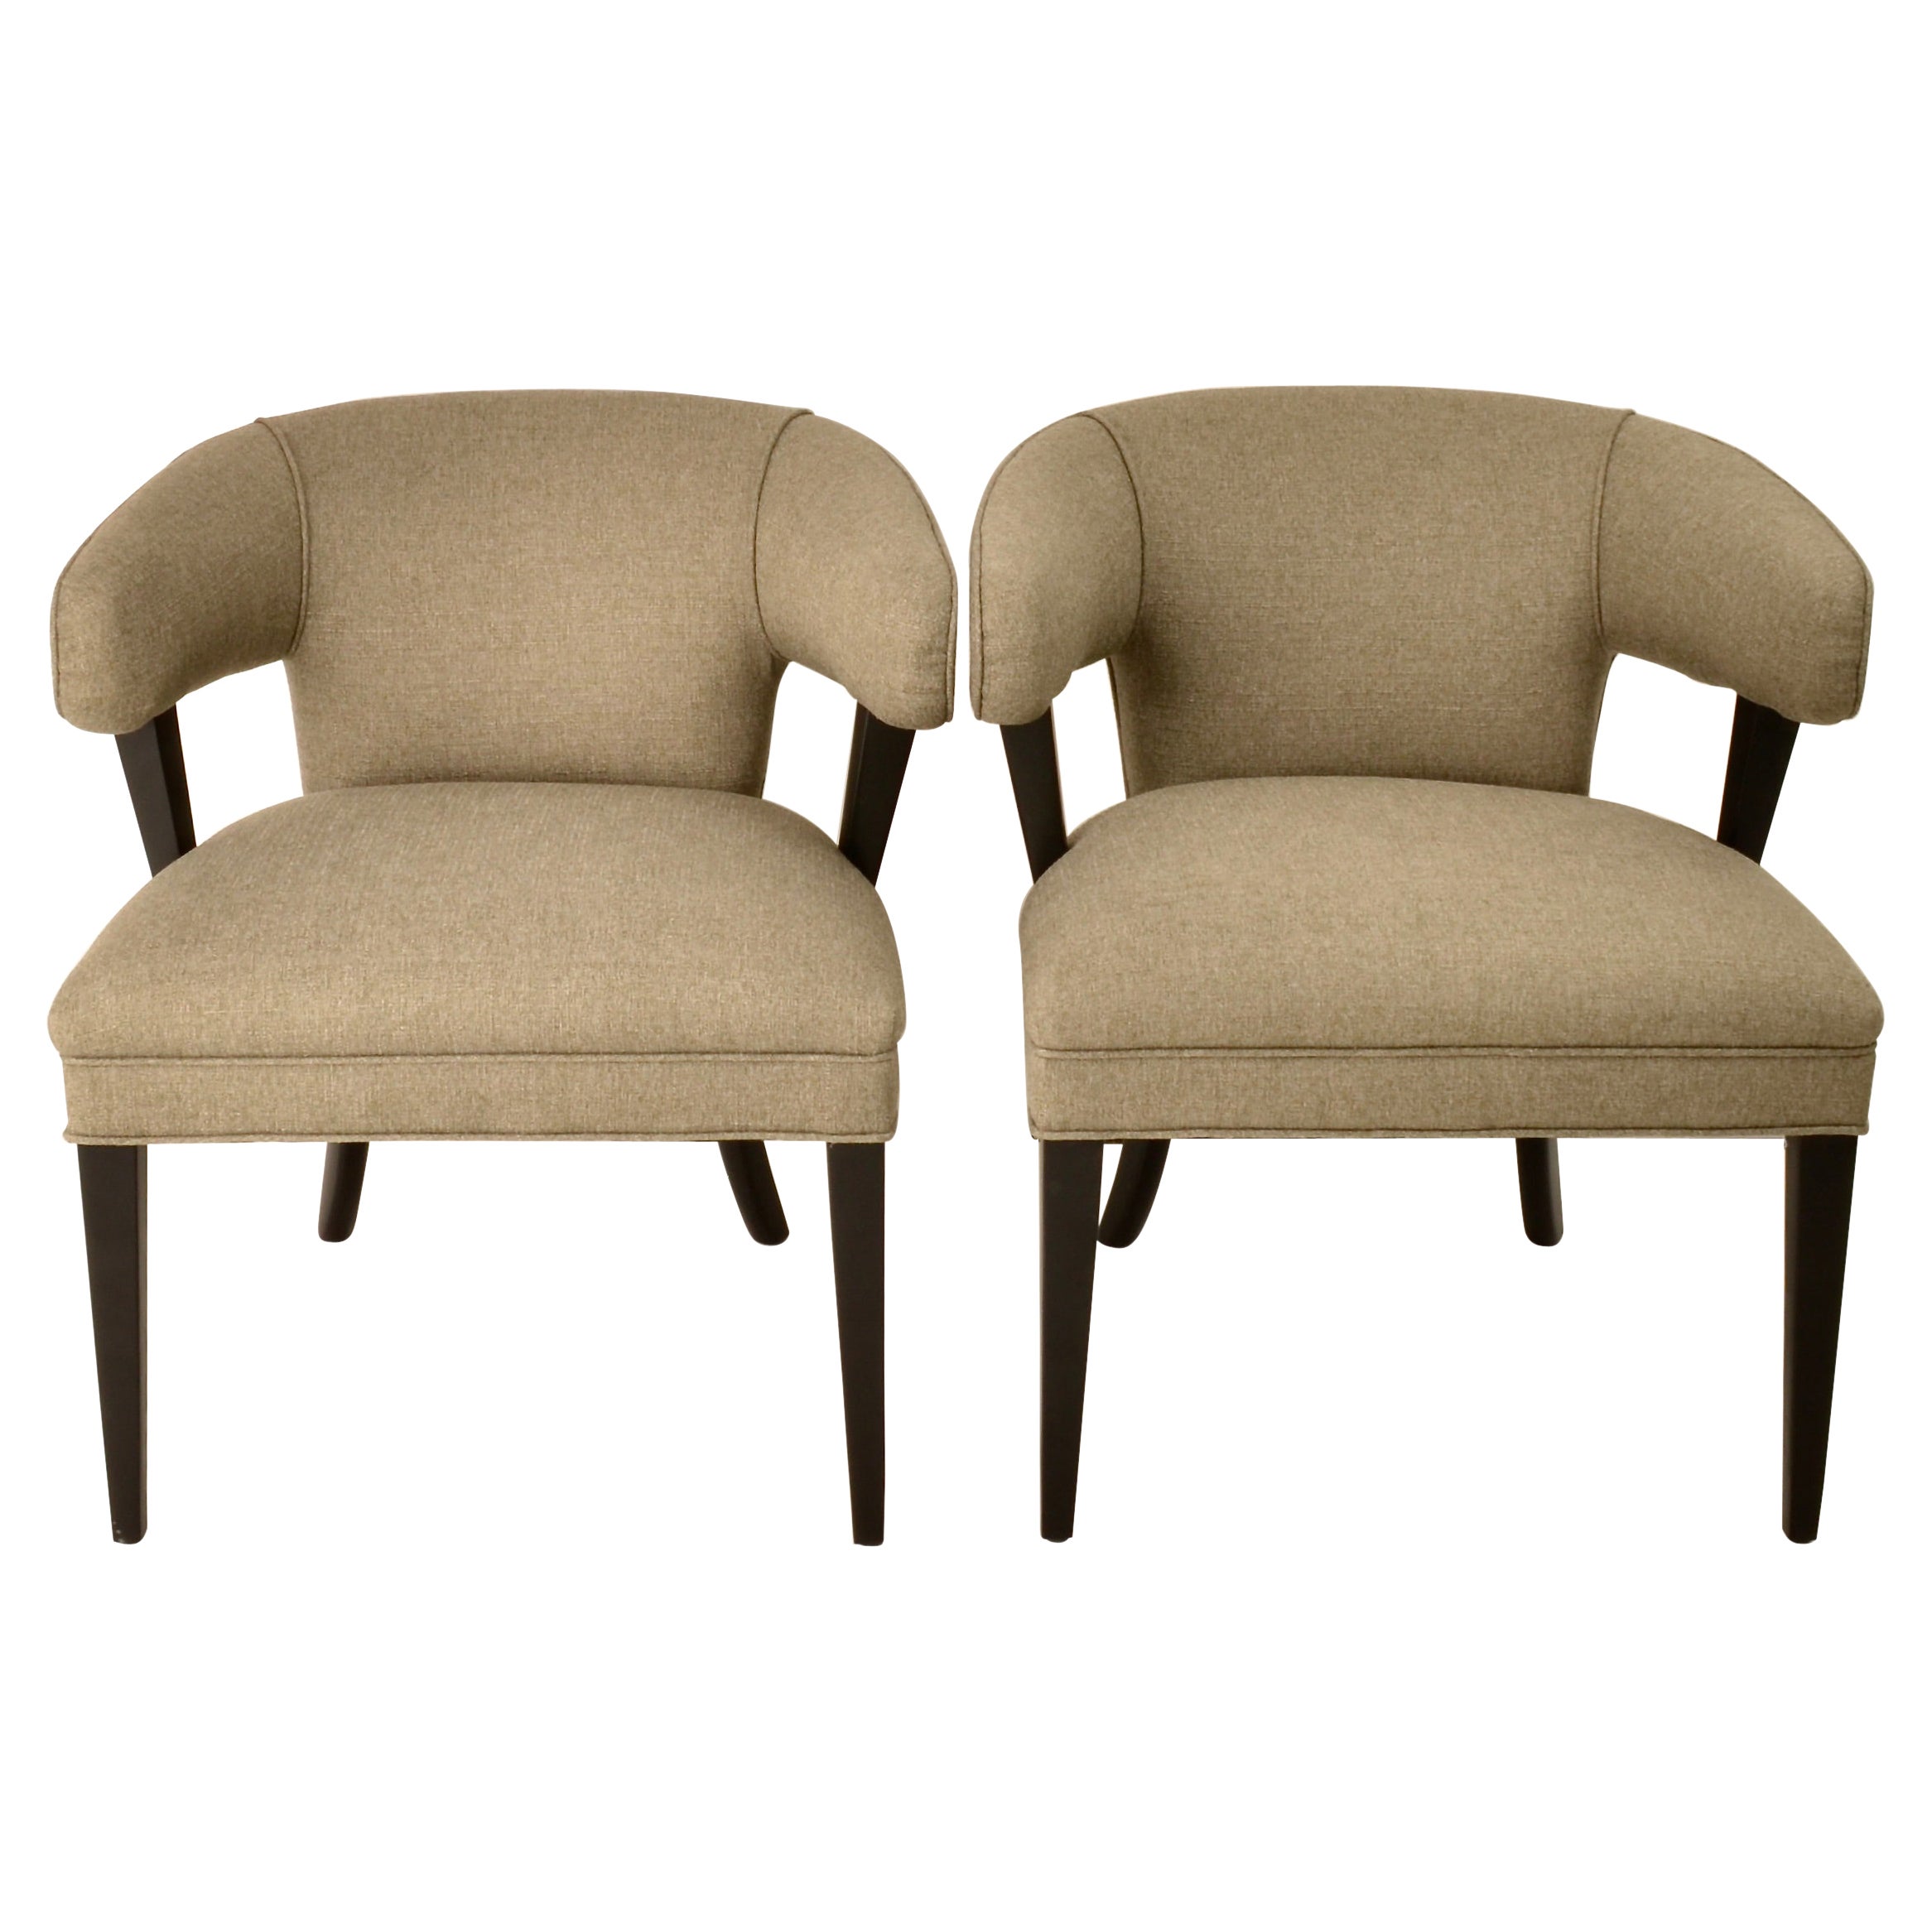 1940s Open Arm Chairs